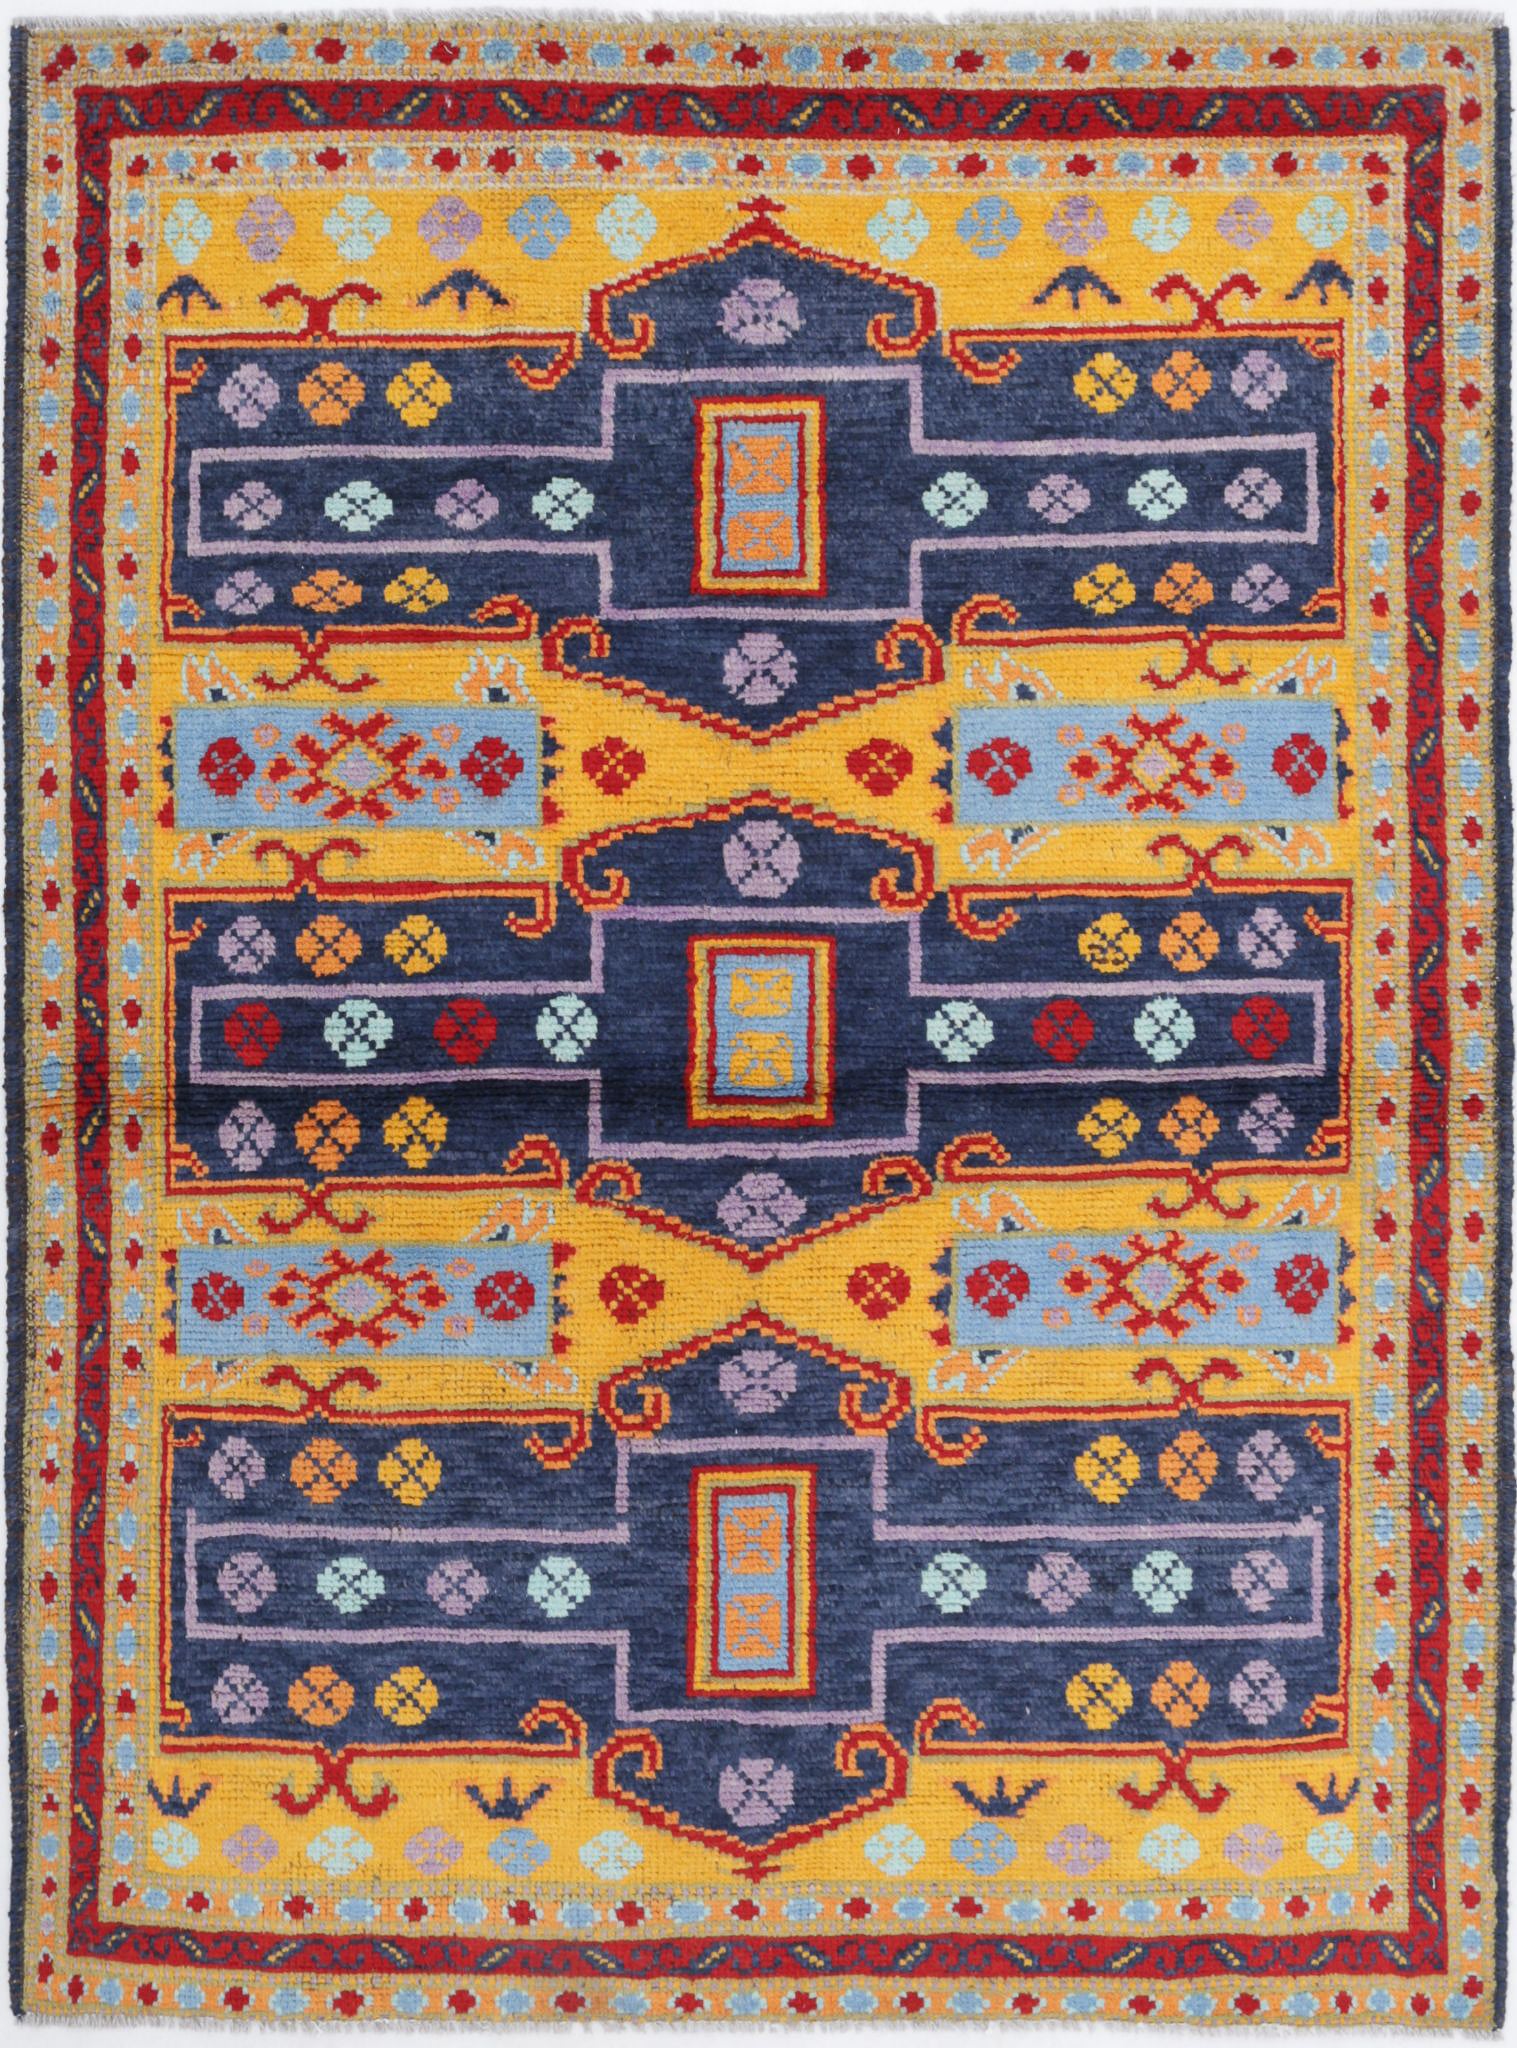 Revival-hand-knotted-qarghani-wool-rug-5014060.jpg